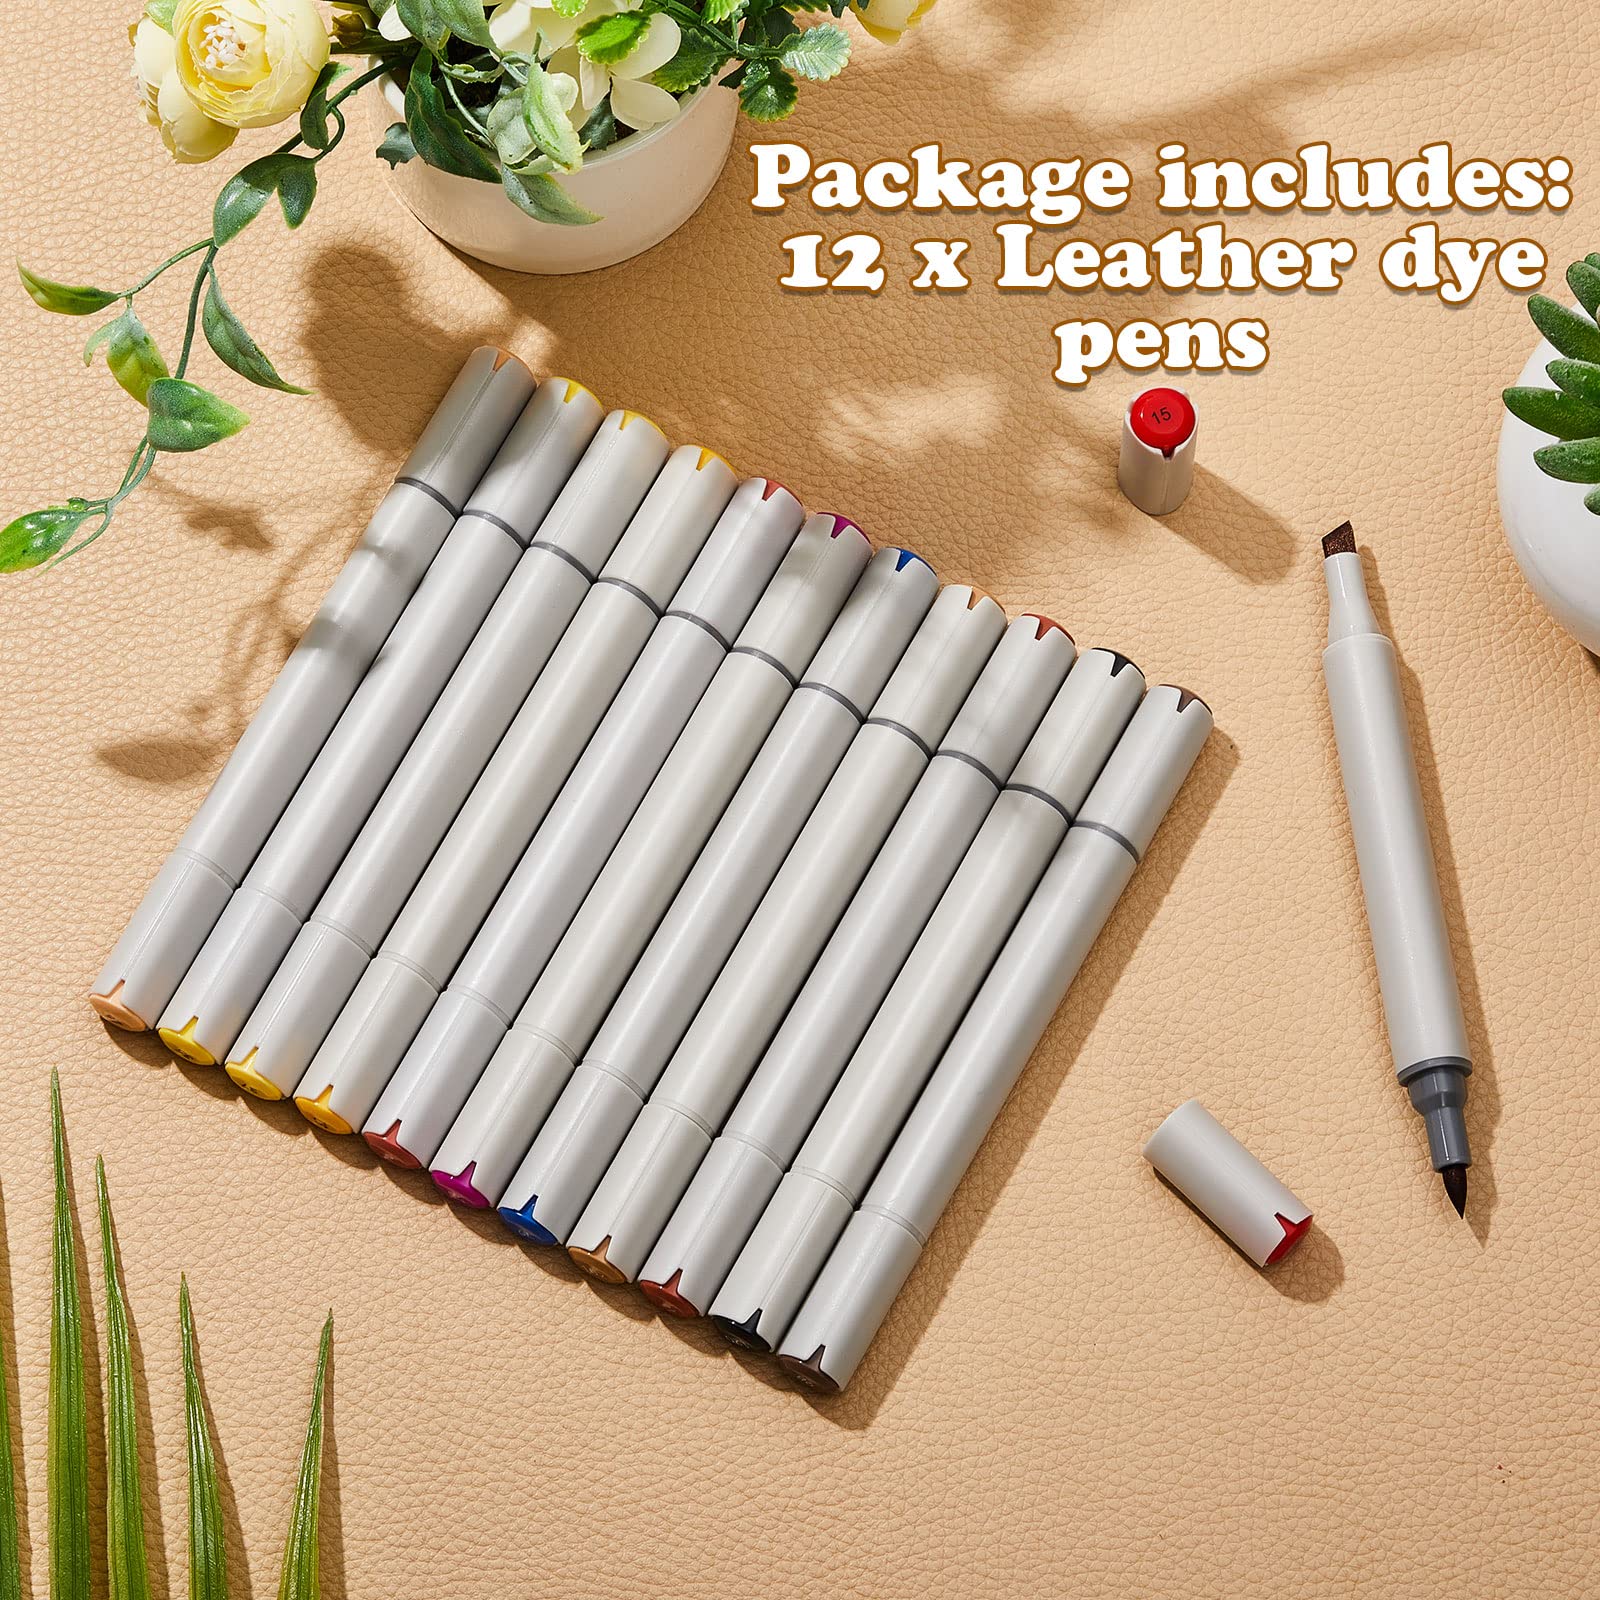 Teling 12 Packs Leather Dye Marker Pens Shoe Marker Leather Dual Tip Leather Touch up Pen for Repair Shoe Leather, 12 Colors